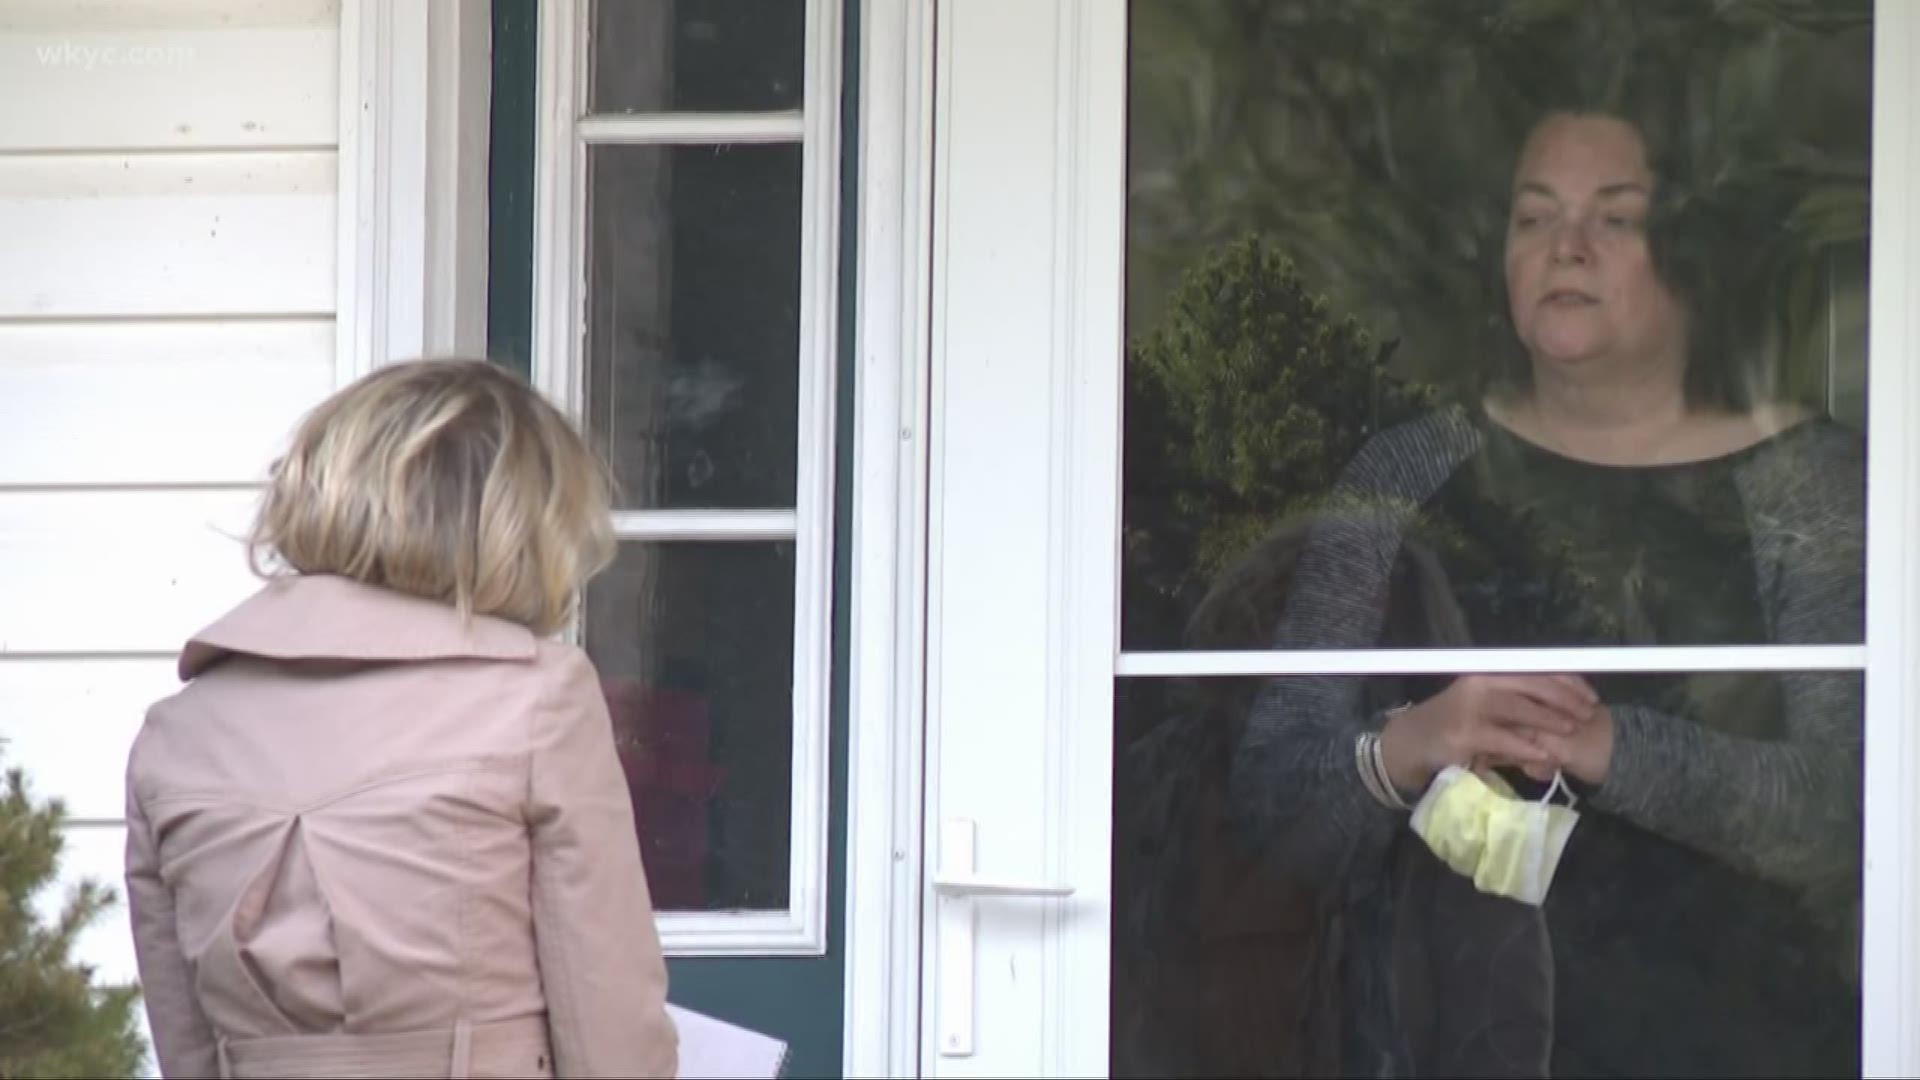 3News Investigator Rachel Polansky went to Driscoll's home, wearing a mask. Talking through a glass door – so that she could share here story.